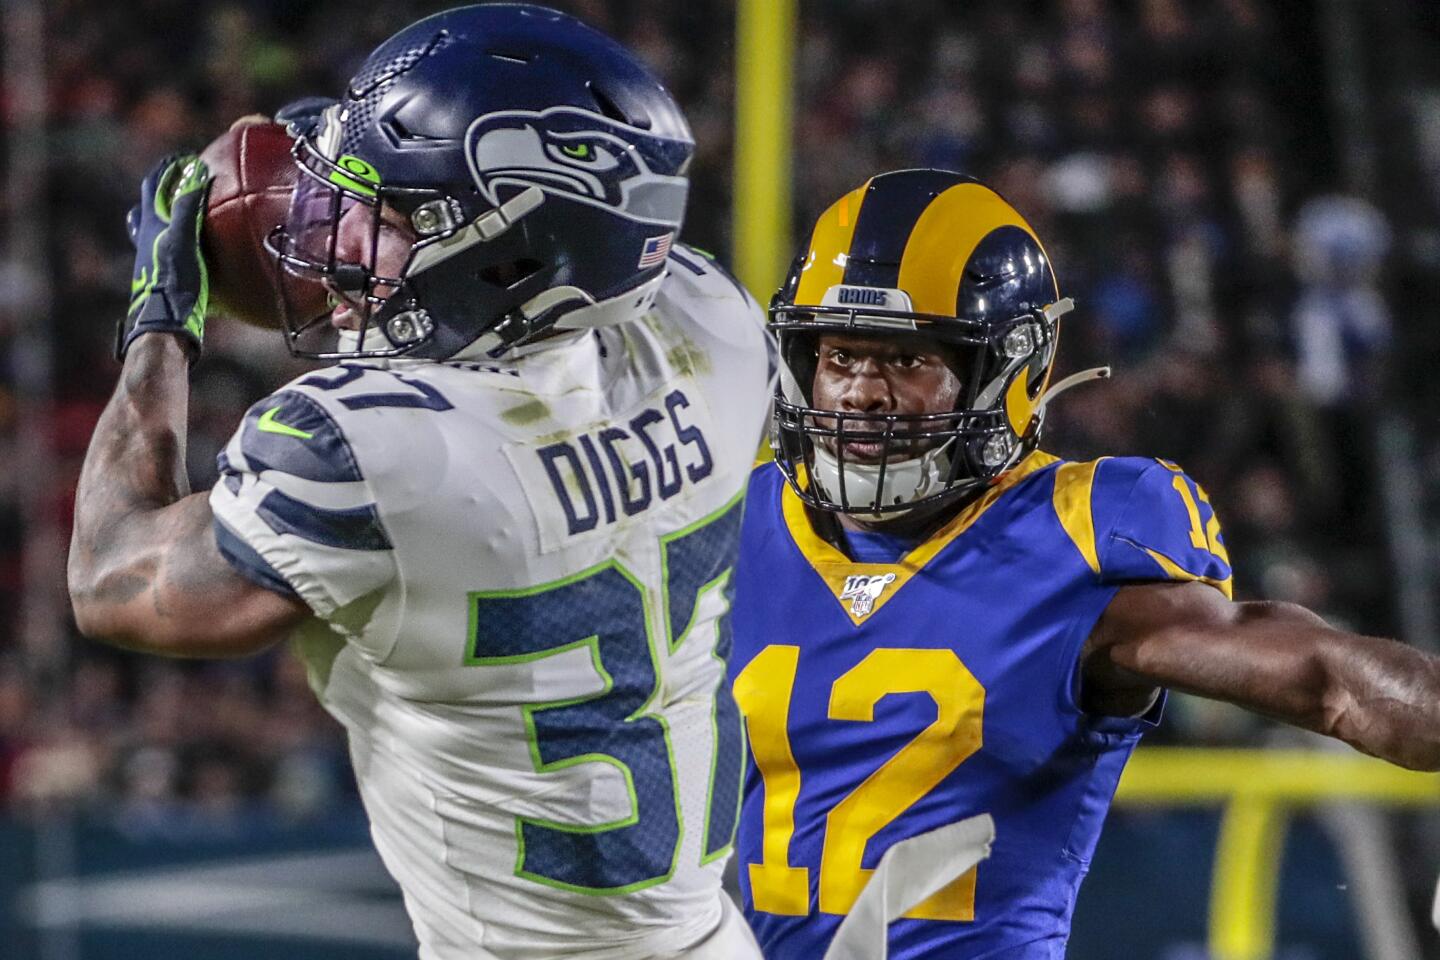 Seattle Seahawks cornerback Quandre Diggs intercepts a pass intended for Rams wide receiver Brandin Cooks.